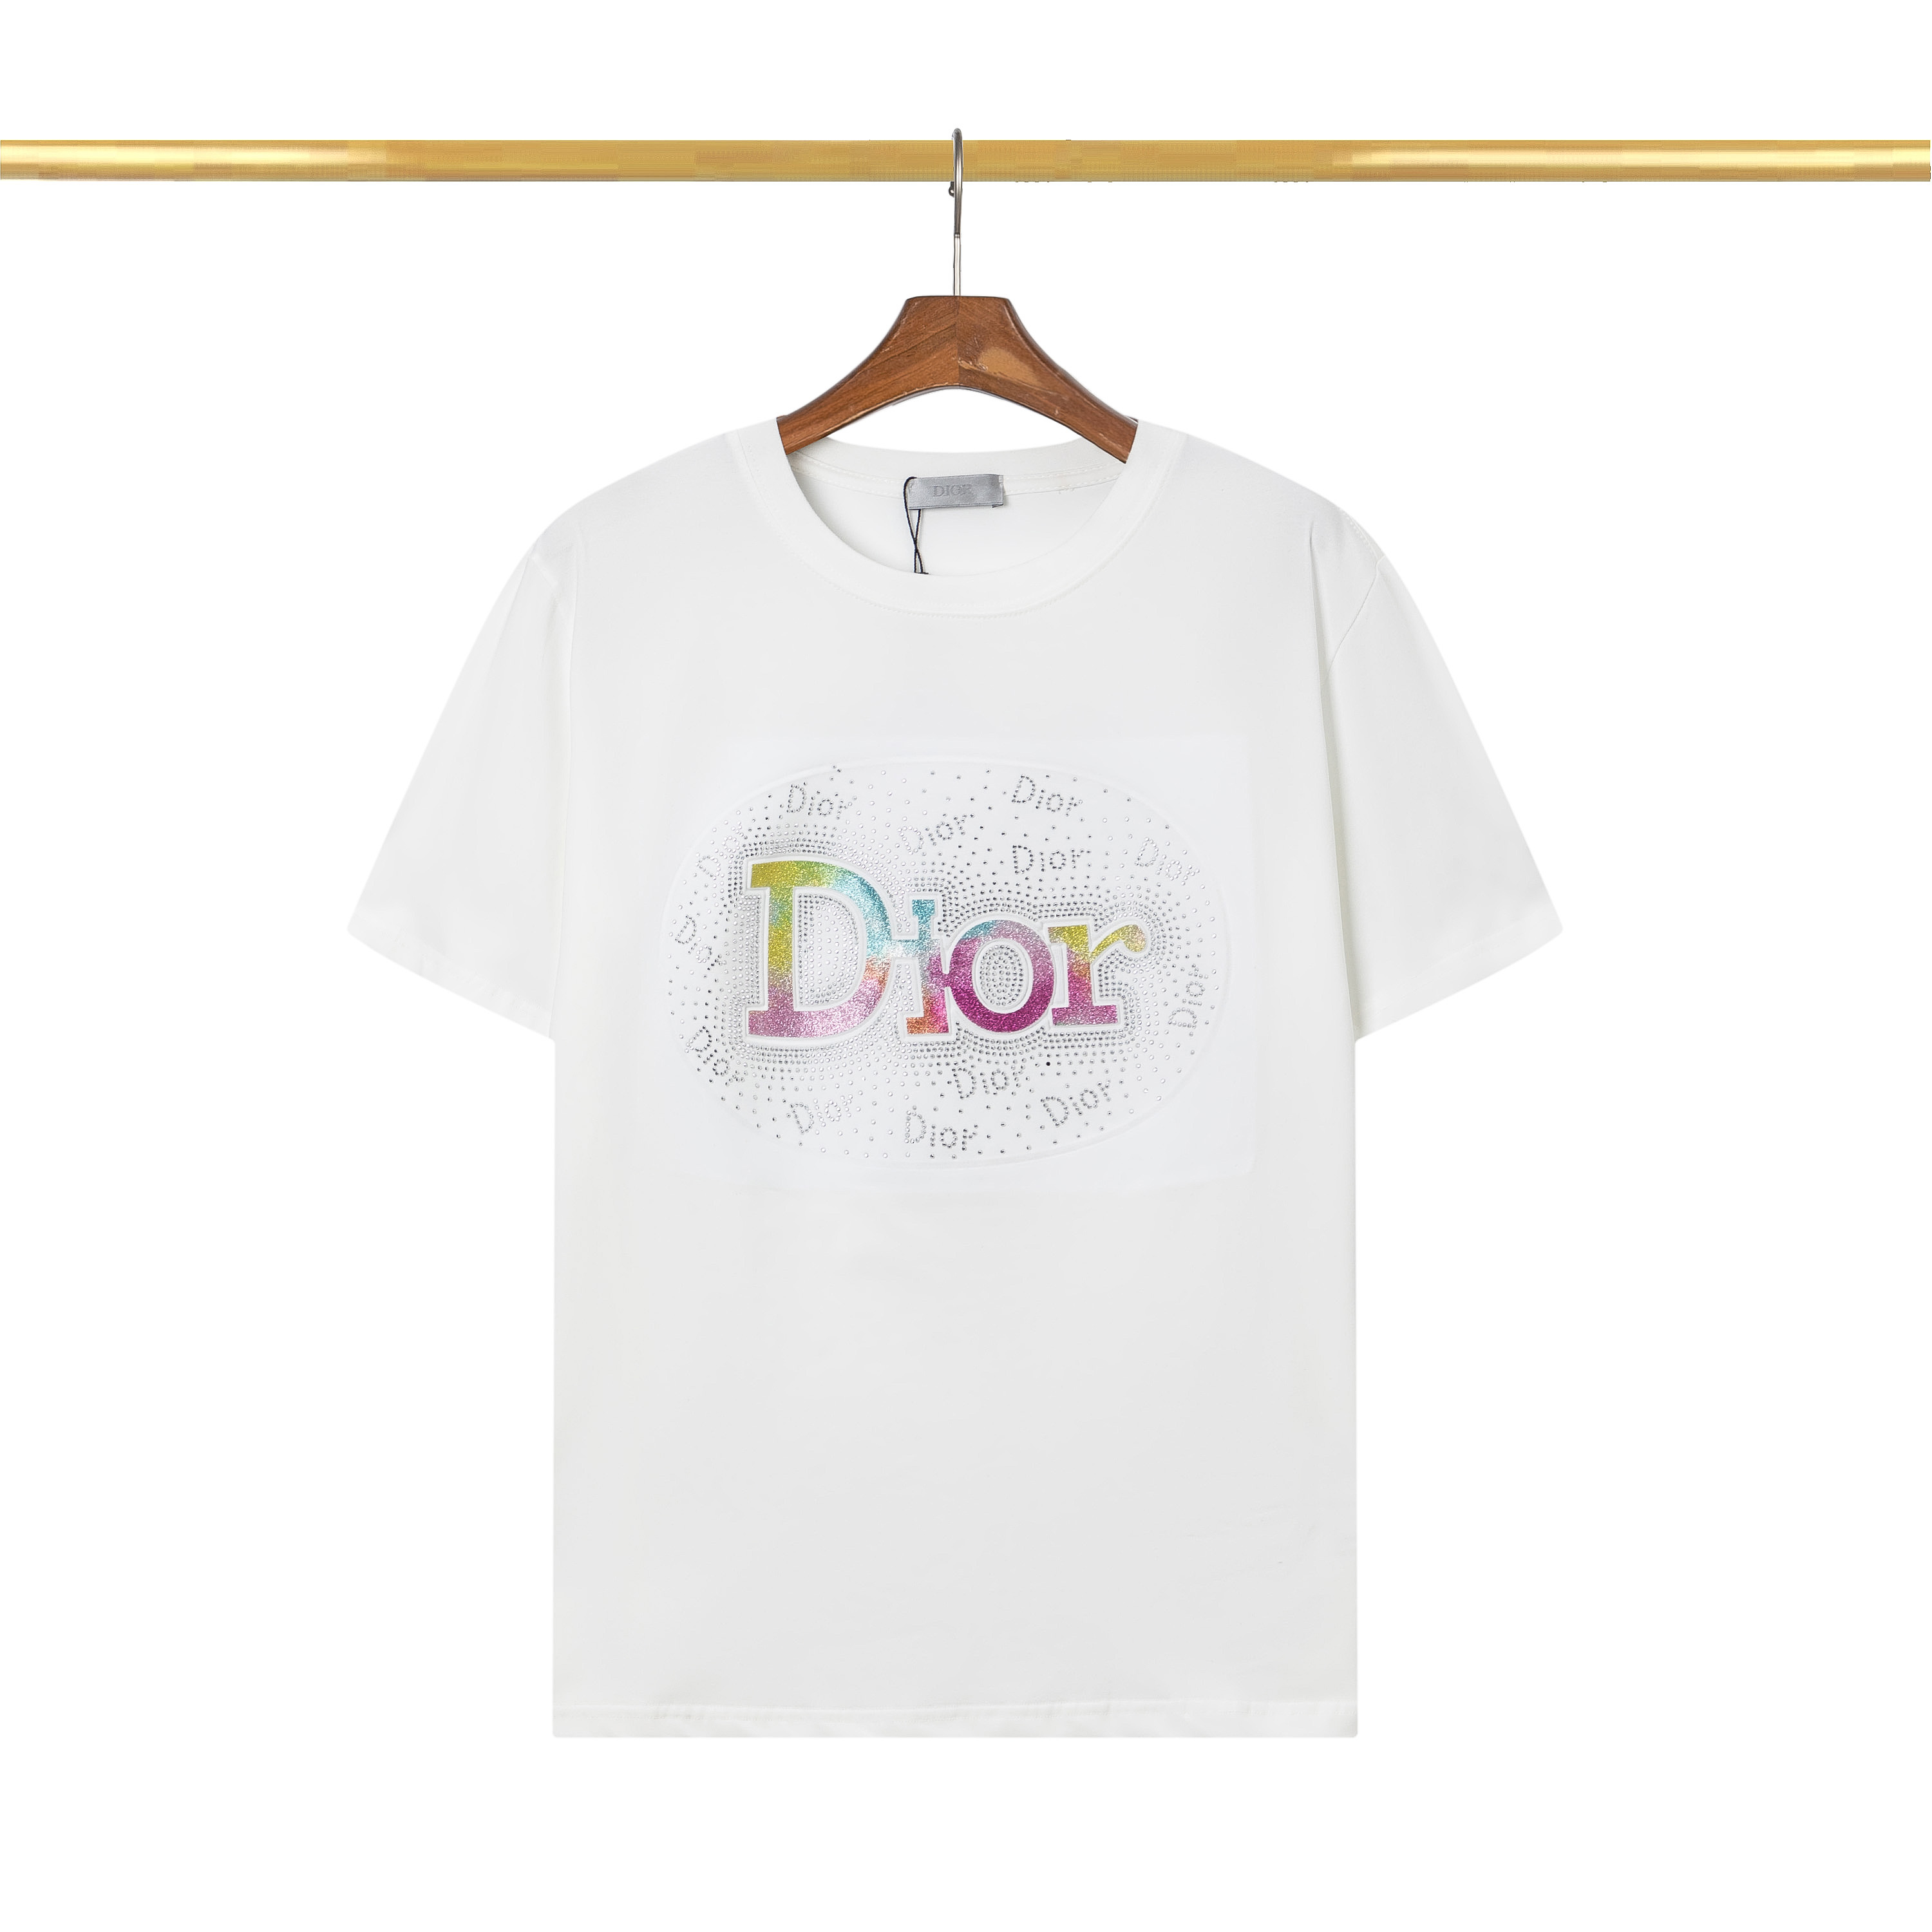 Dior Short Sleeve T Shirts Unisex # 265511, cheap Dior T Shirts, only $27!